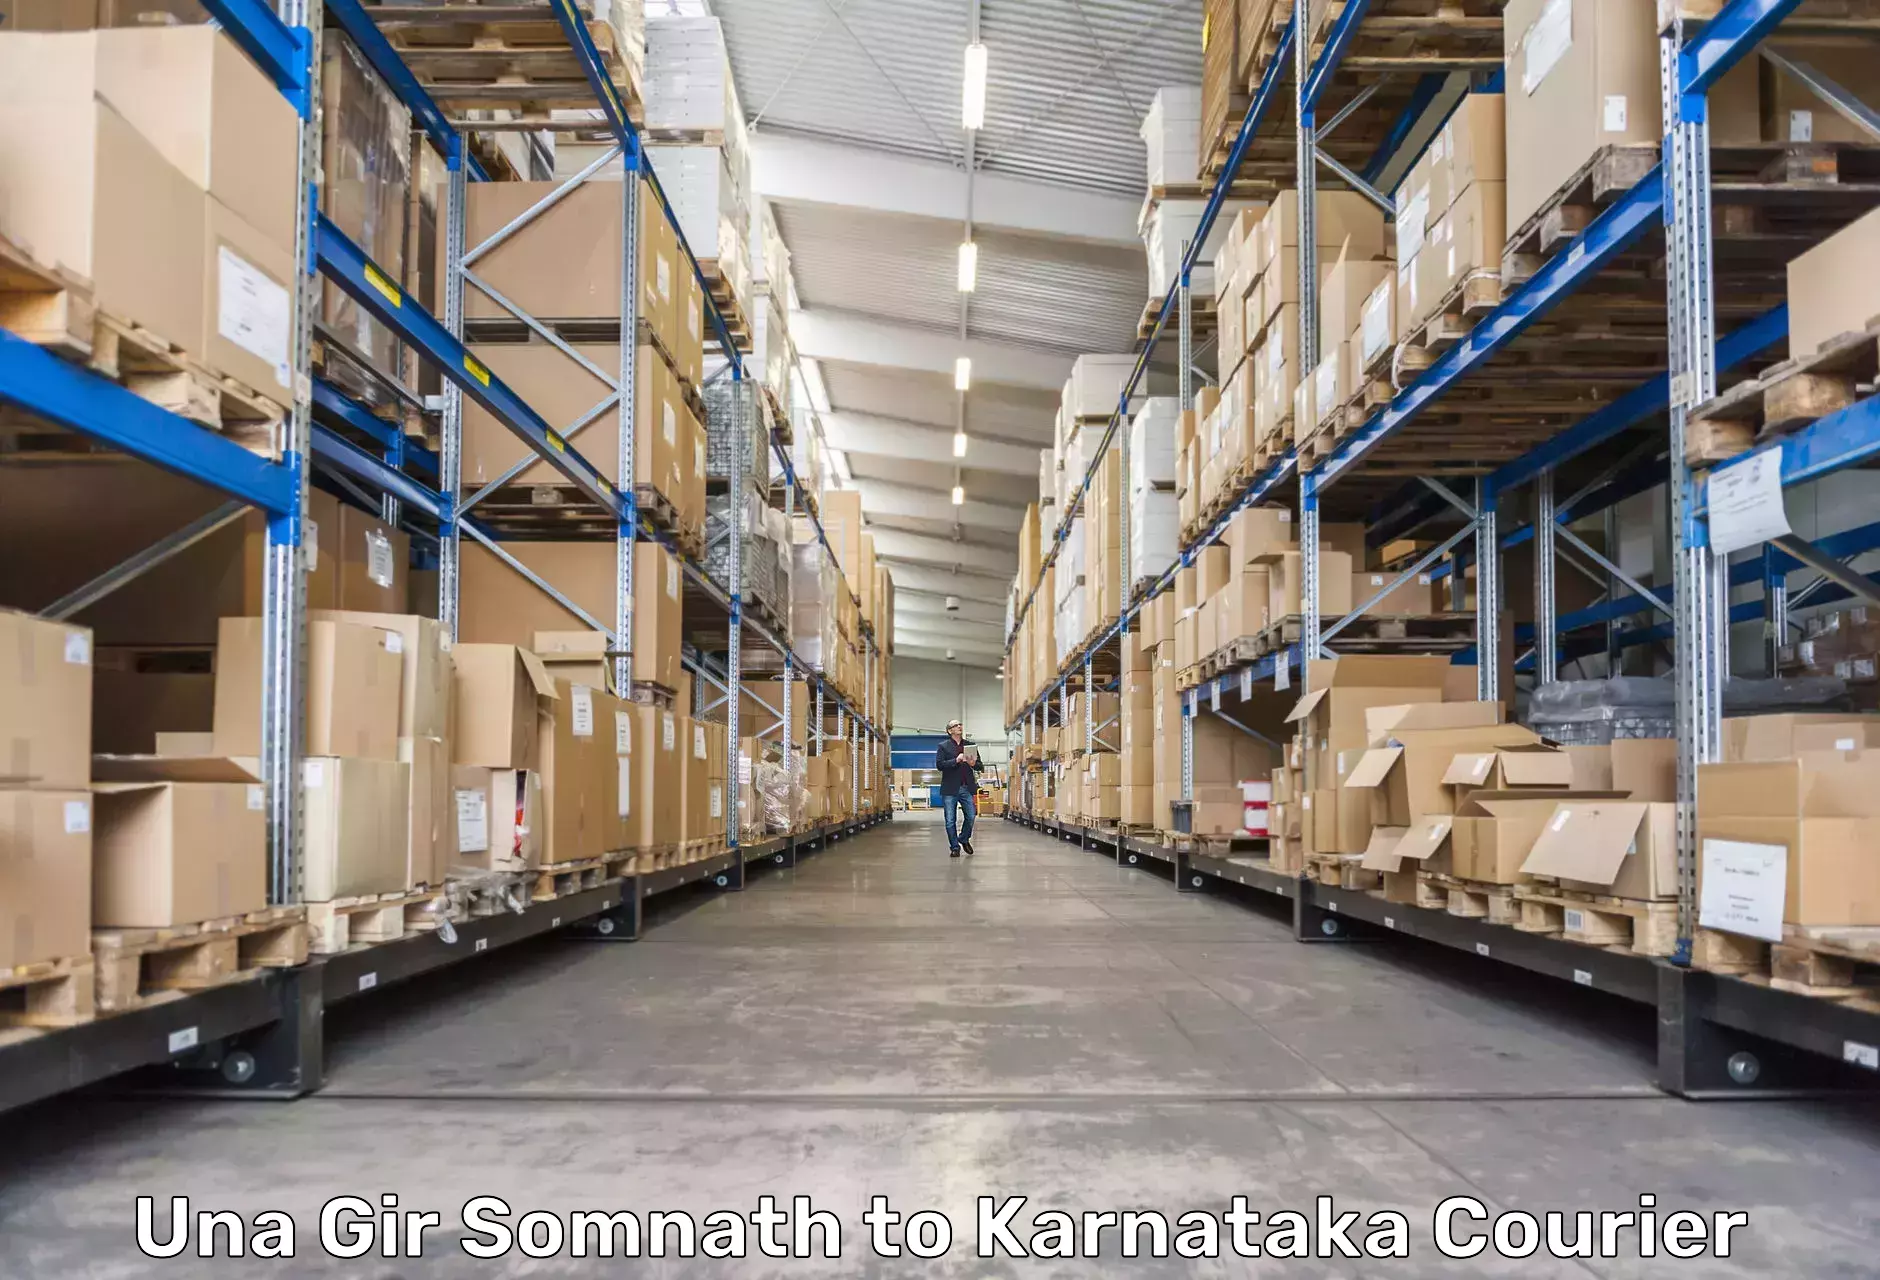 Global courier networks Una Gir Somnath to Laxmeshwar